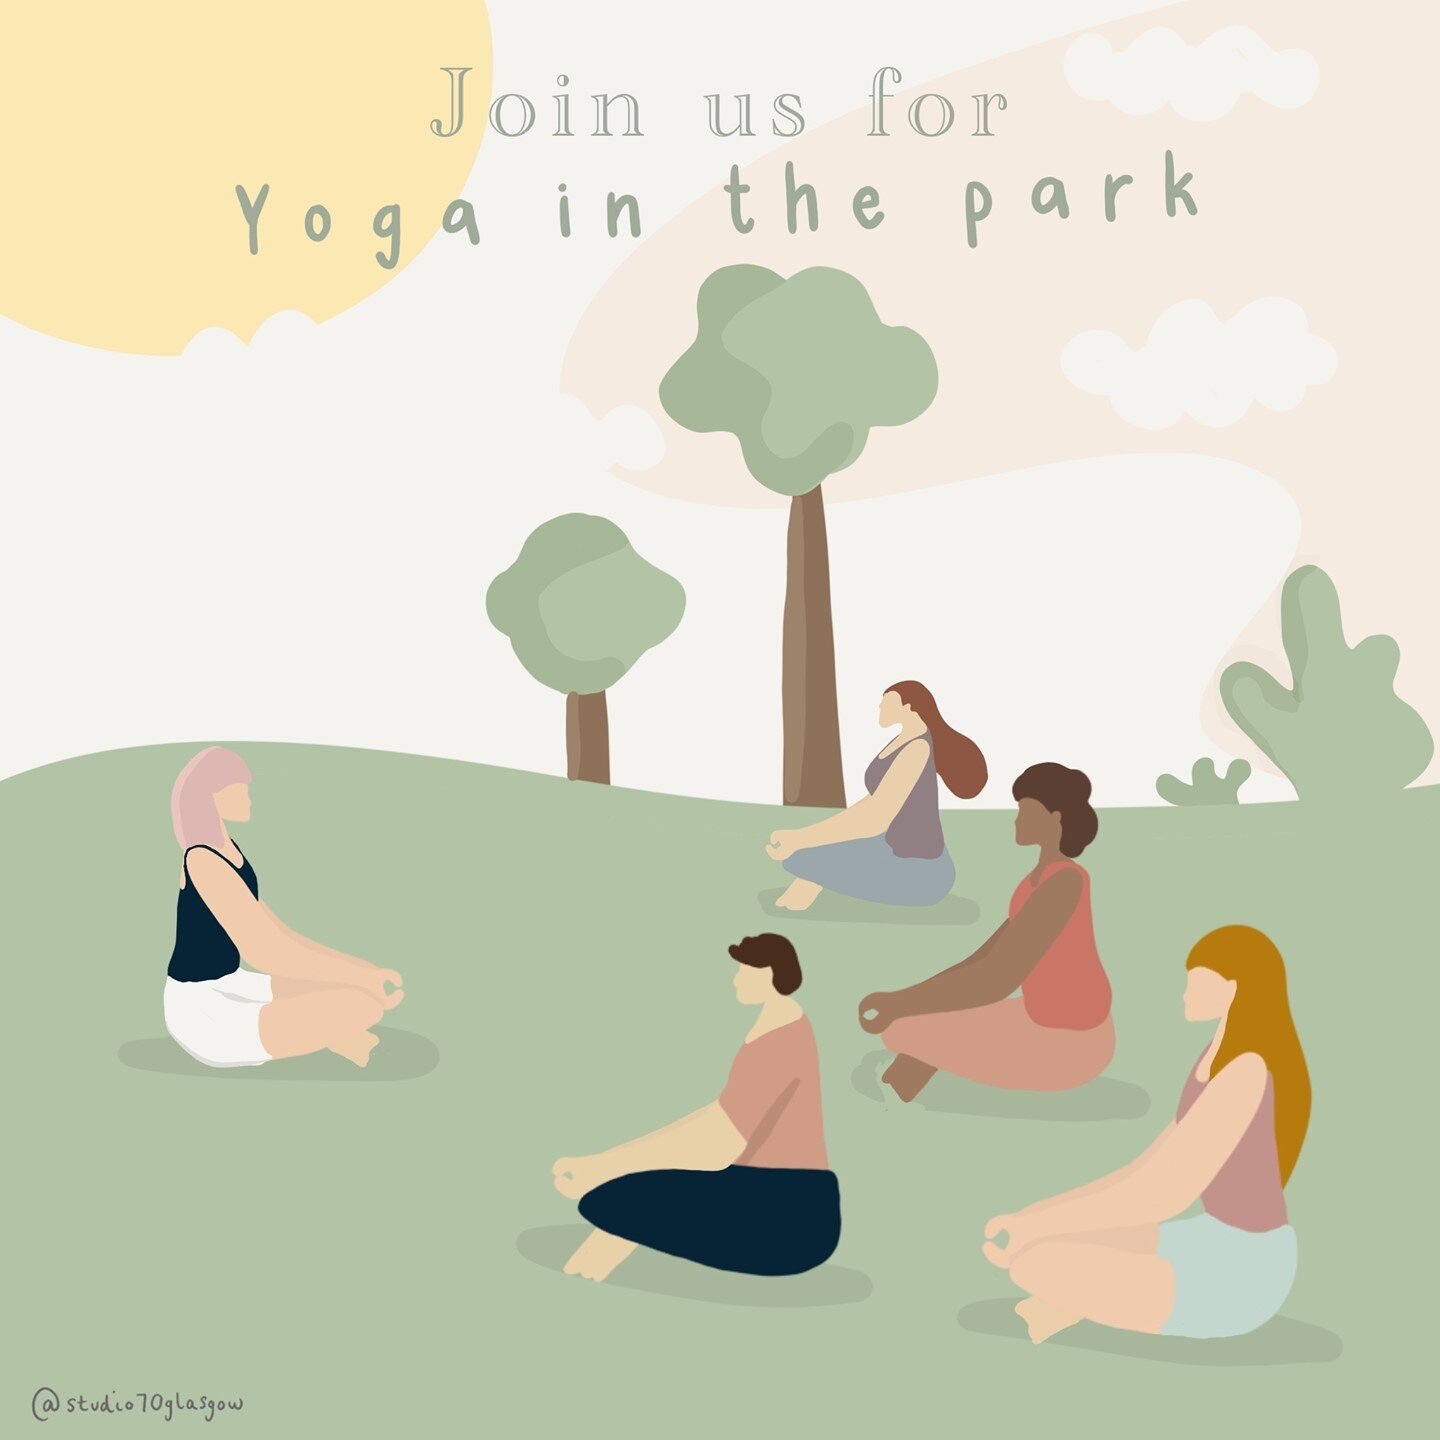 Our next park yoga session is taking place this Saturday morning with Lorraine. ⁠
⁠
✨Queen's Park⁠
✨Top of main stairs⁠
✨Bring a yoga mat and a bottle of water⁠
✨Saturday, 11am⁠
⁠
⁠
Link in bio to book⁠
⁠
#parkyoga #yogainthepark #outdooryoga #yogail